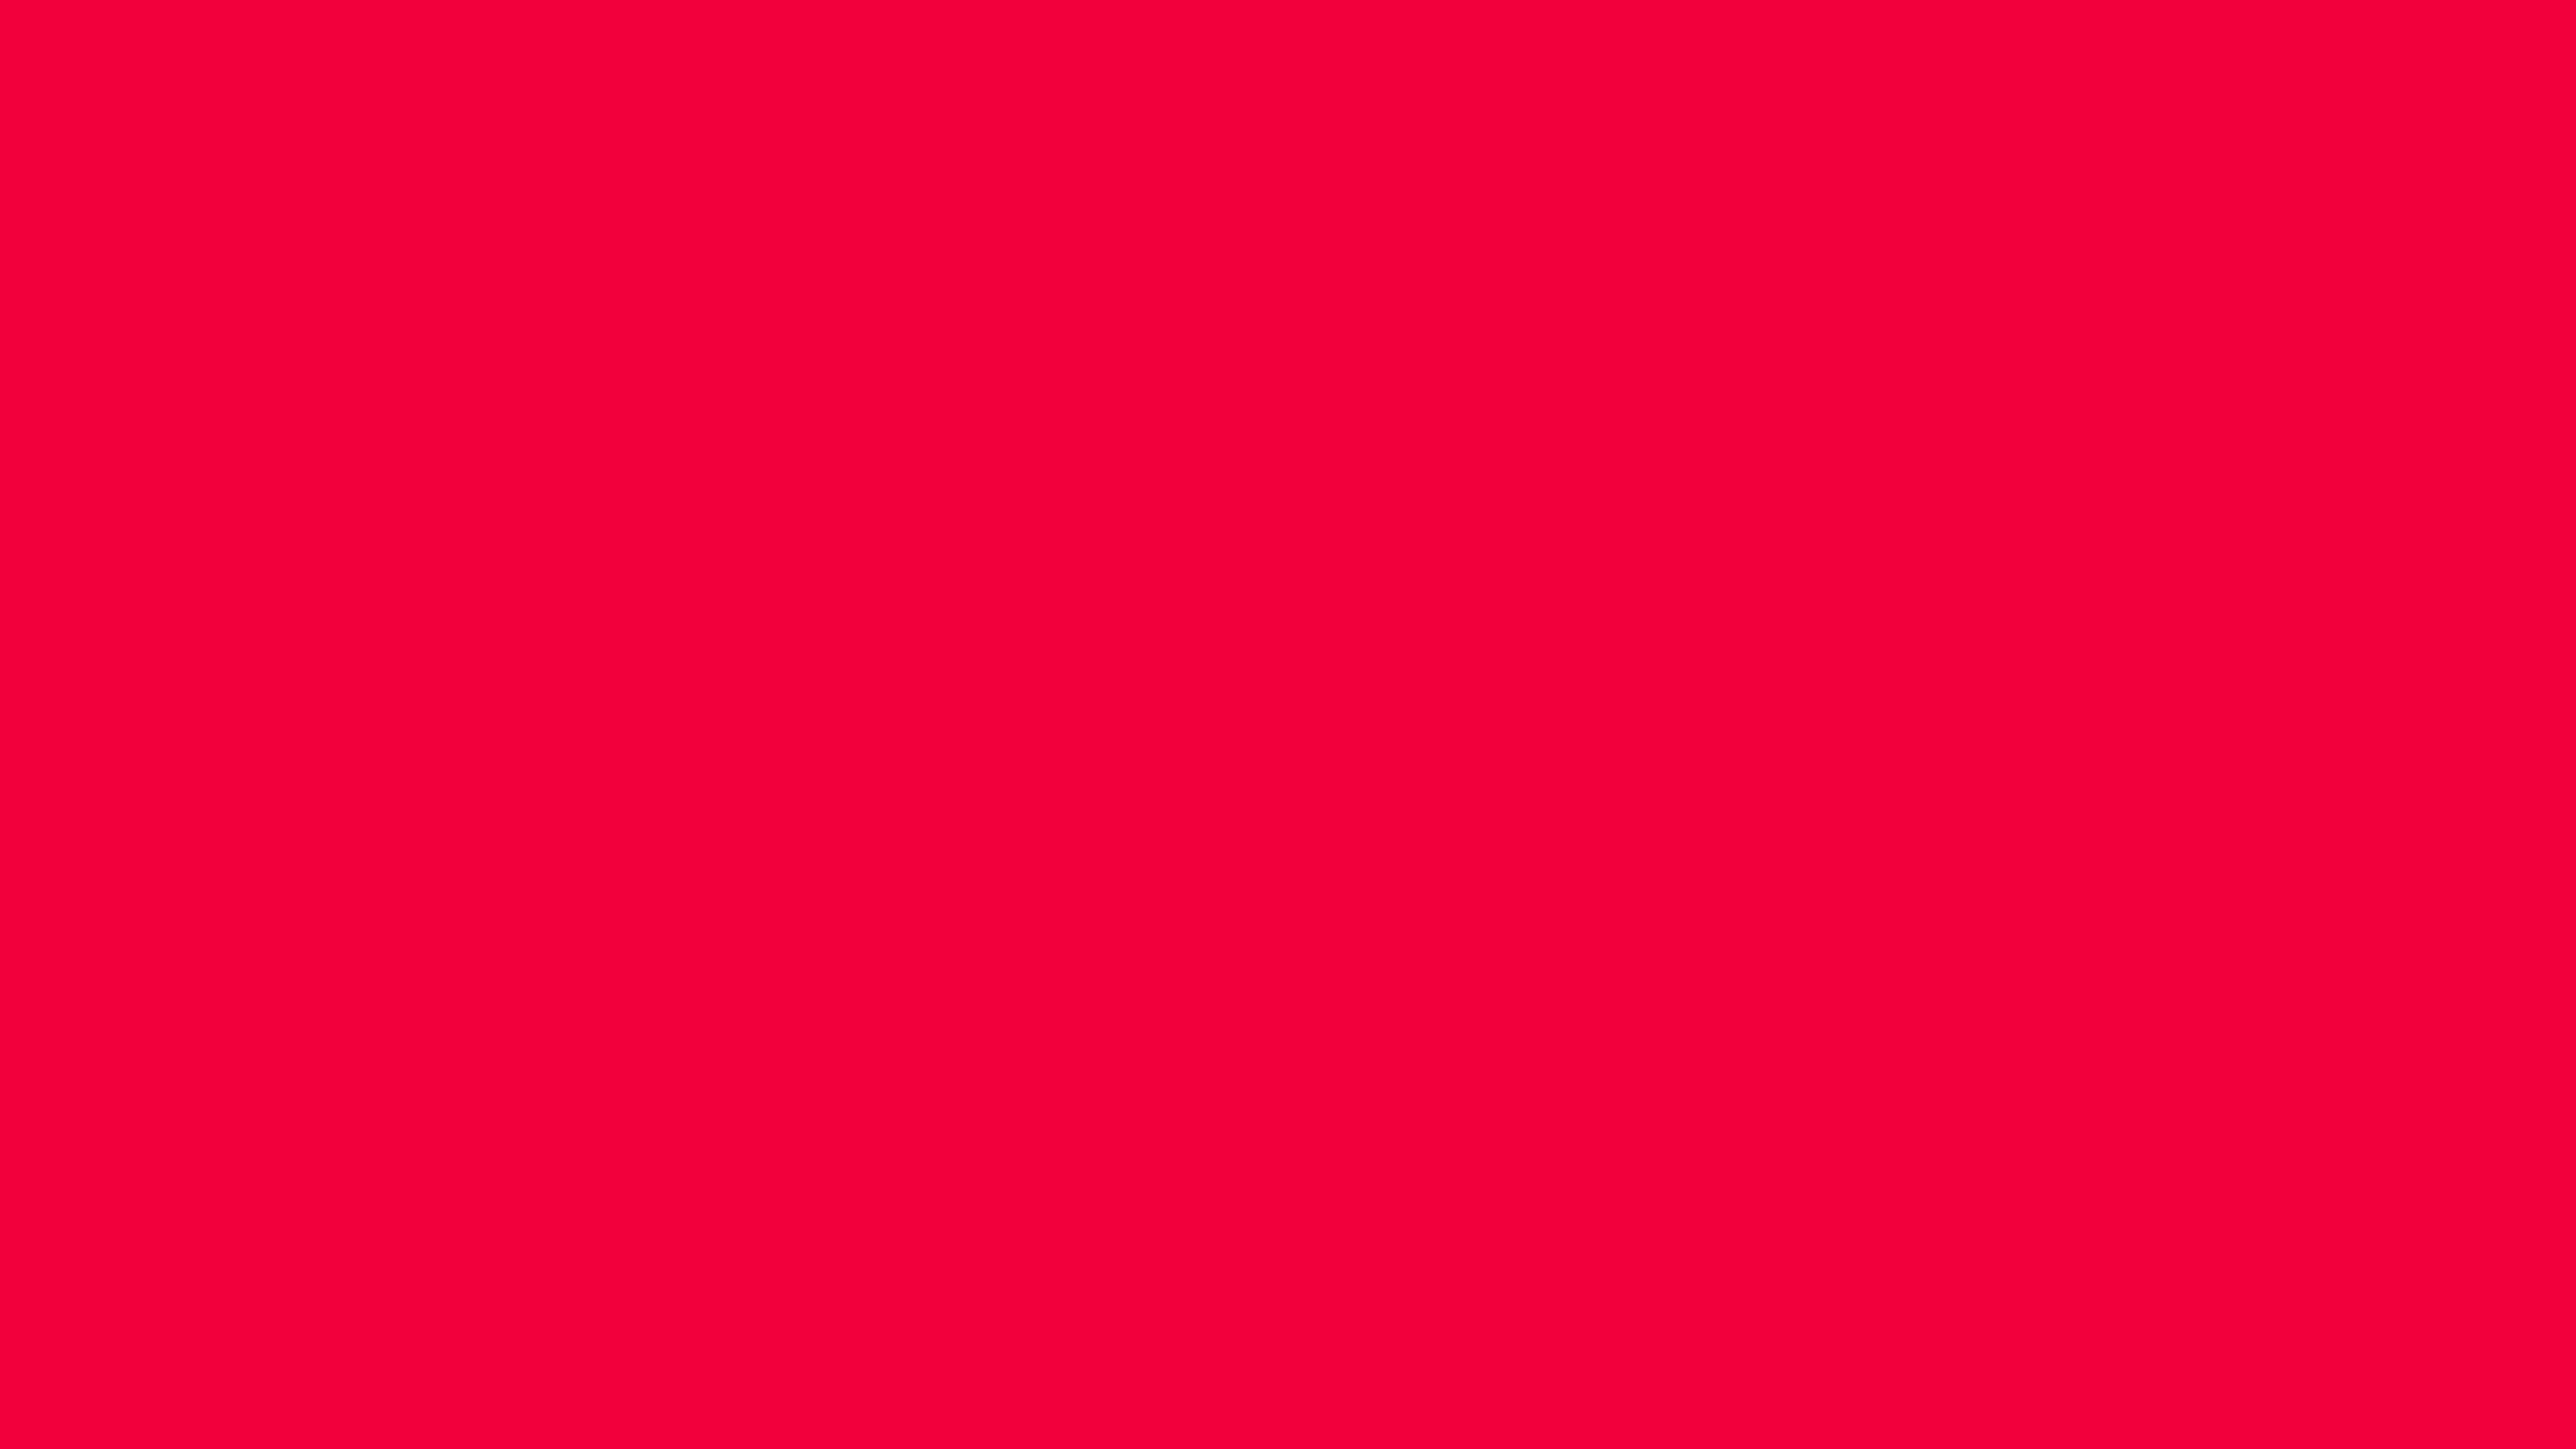 7680x4320 Red Munsell Solid Color Background